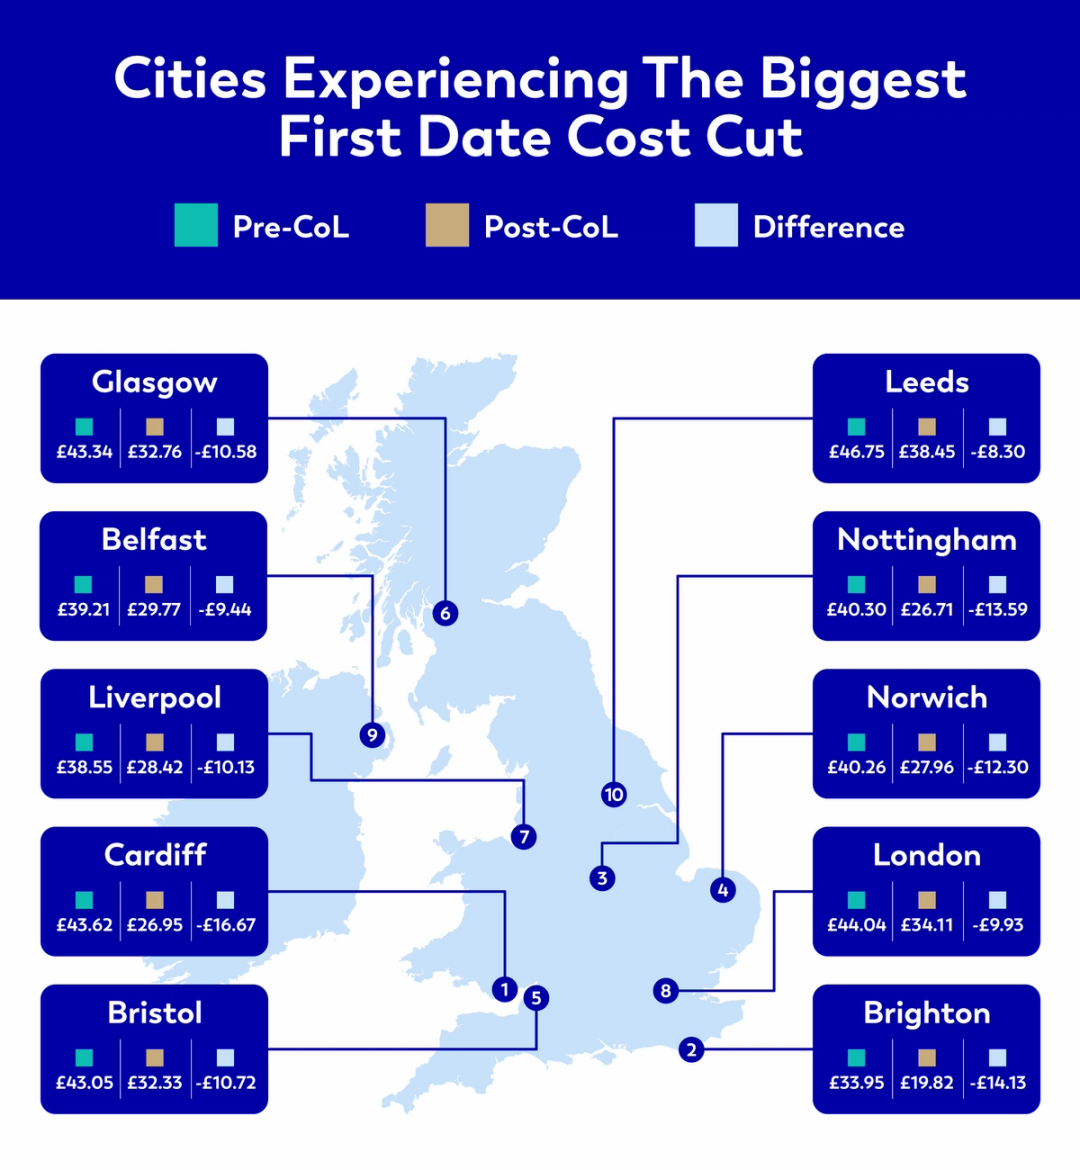 Cities experienceing the biggest first date cost cust:

1. Cardiff
2. Brighton
3. Nottingham
4. Norwich
5. Bristol
6. Glasgow
7. Liverpool
8. London
9. Belfast
10. Leeds